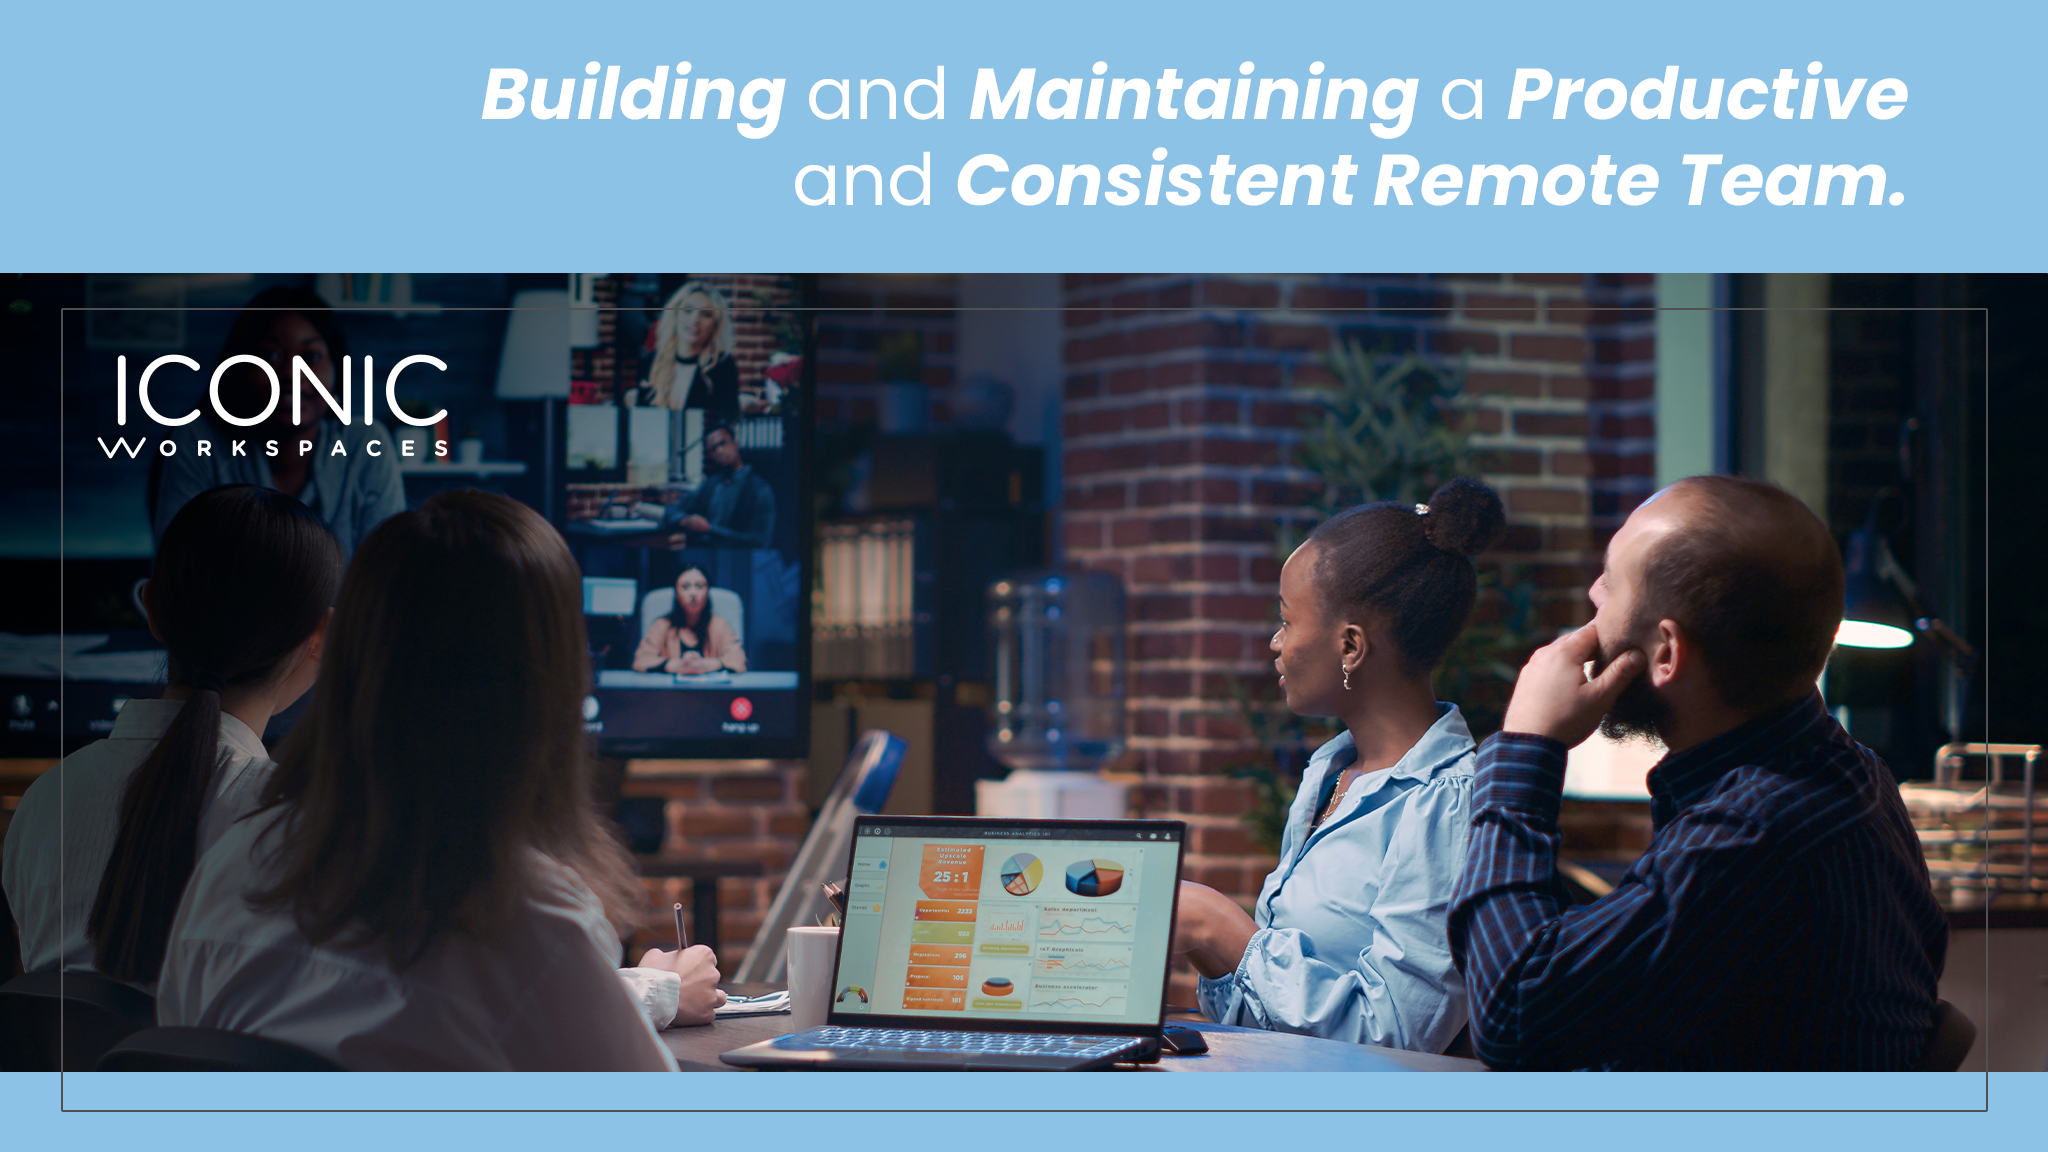 The Key to Success: Building and Maintaining a Consistent Remote Team